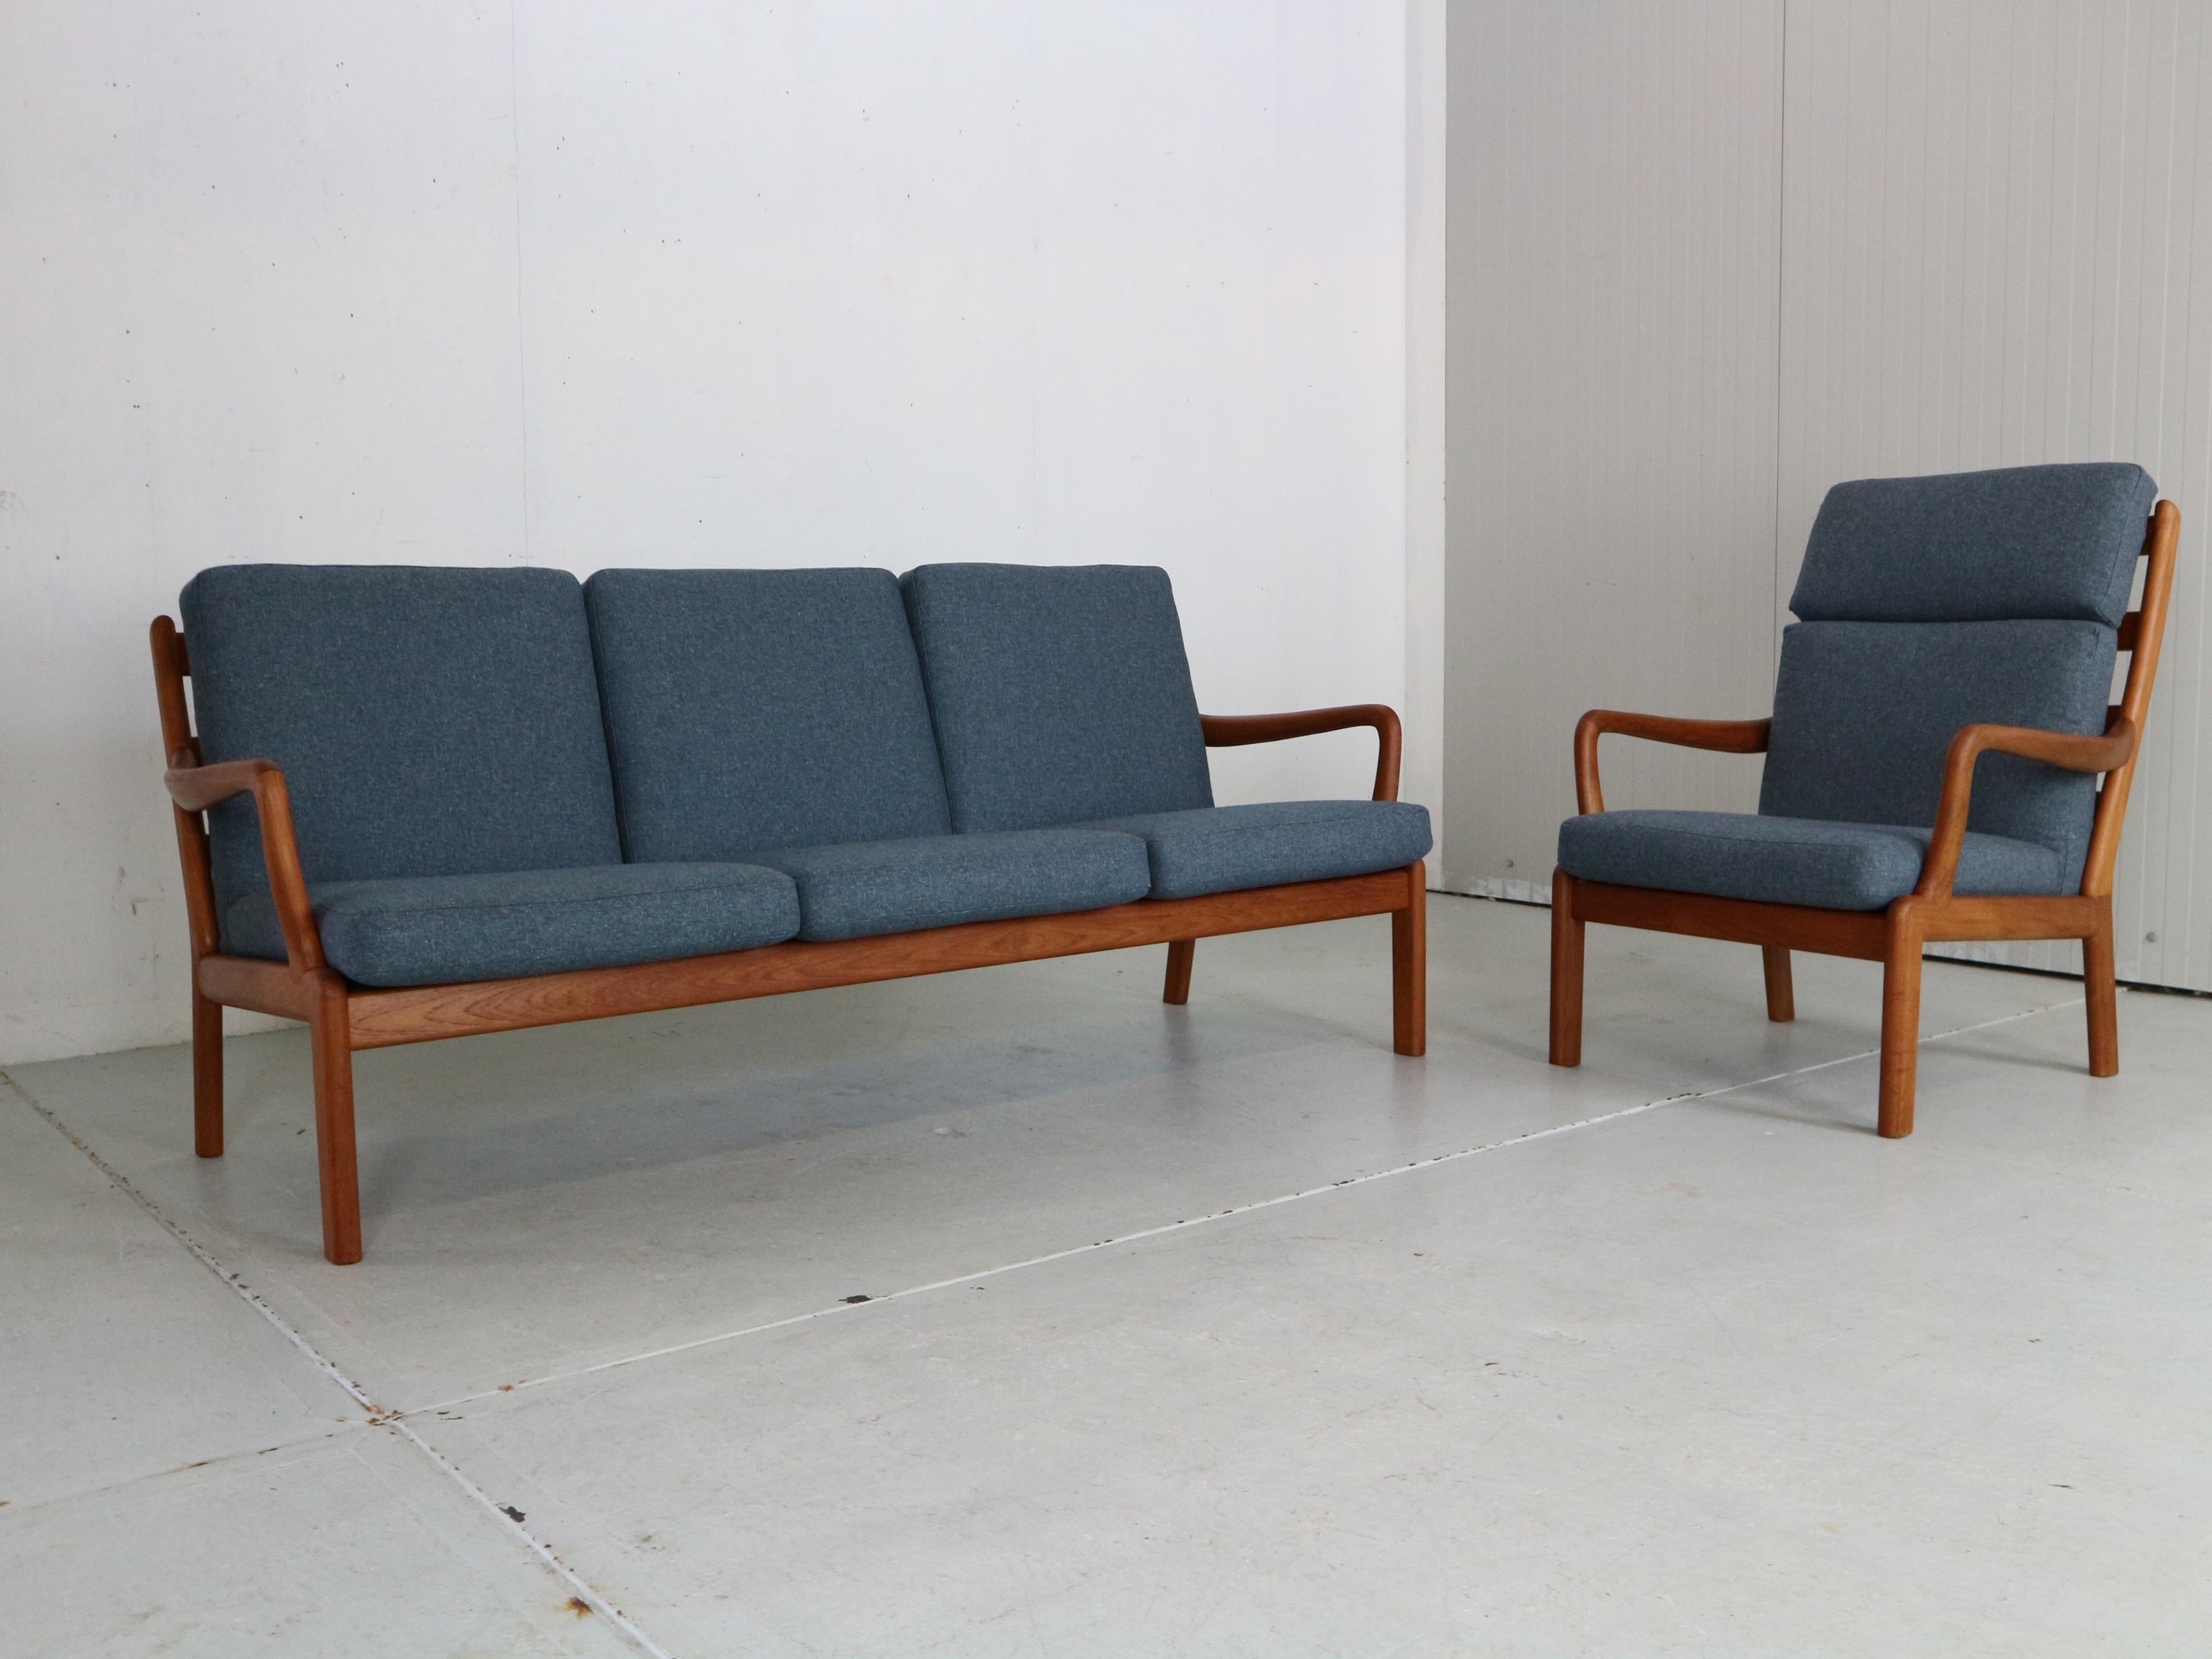 Gorgeous Danish Modern living room set designed and manufactured by L. Olsen & Son. 
Featuring the typical organic 1960s Danish design, solid teak frame, high quality newly reupholstered in blue colour wool fabric.
Excellent seating comfort and a